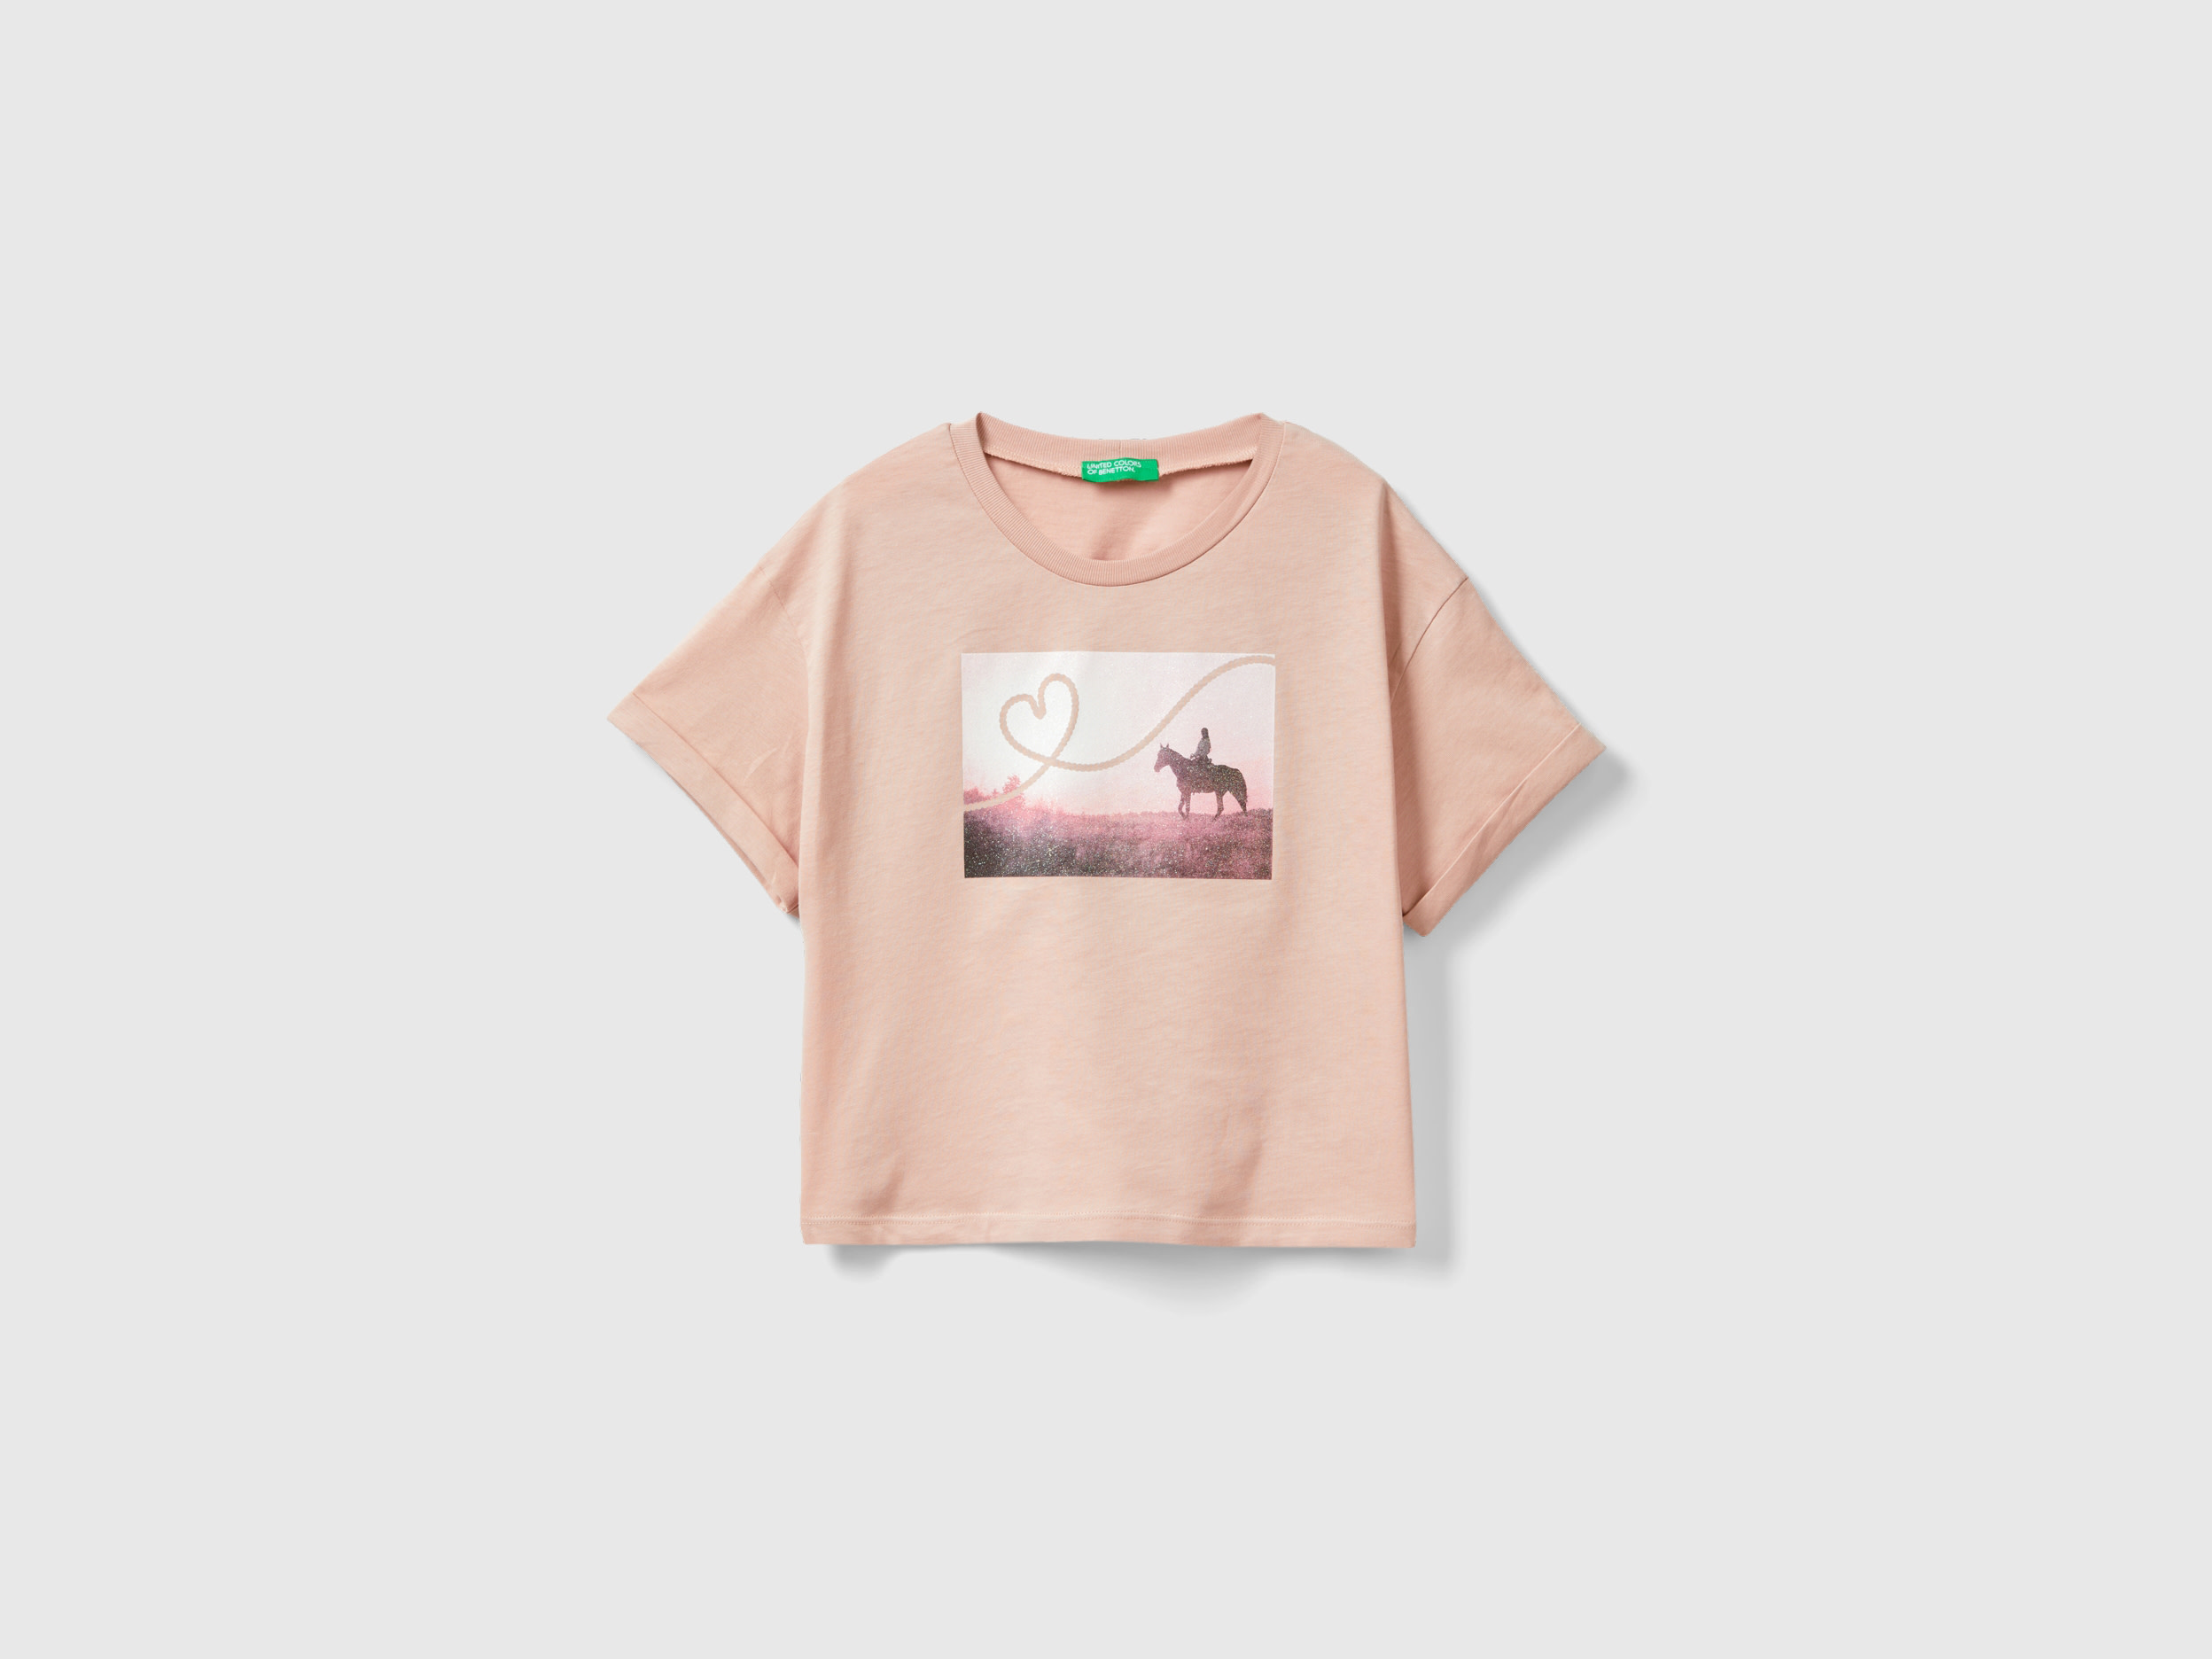 Image of Benetton, T-shirt With Photographic Horse Print, size L, Soft Pink, Kids